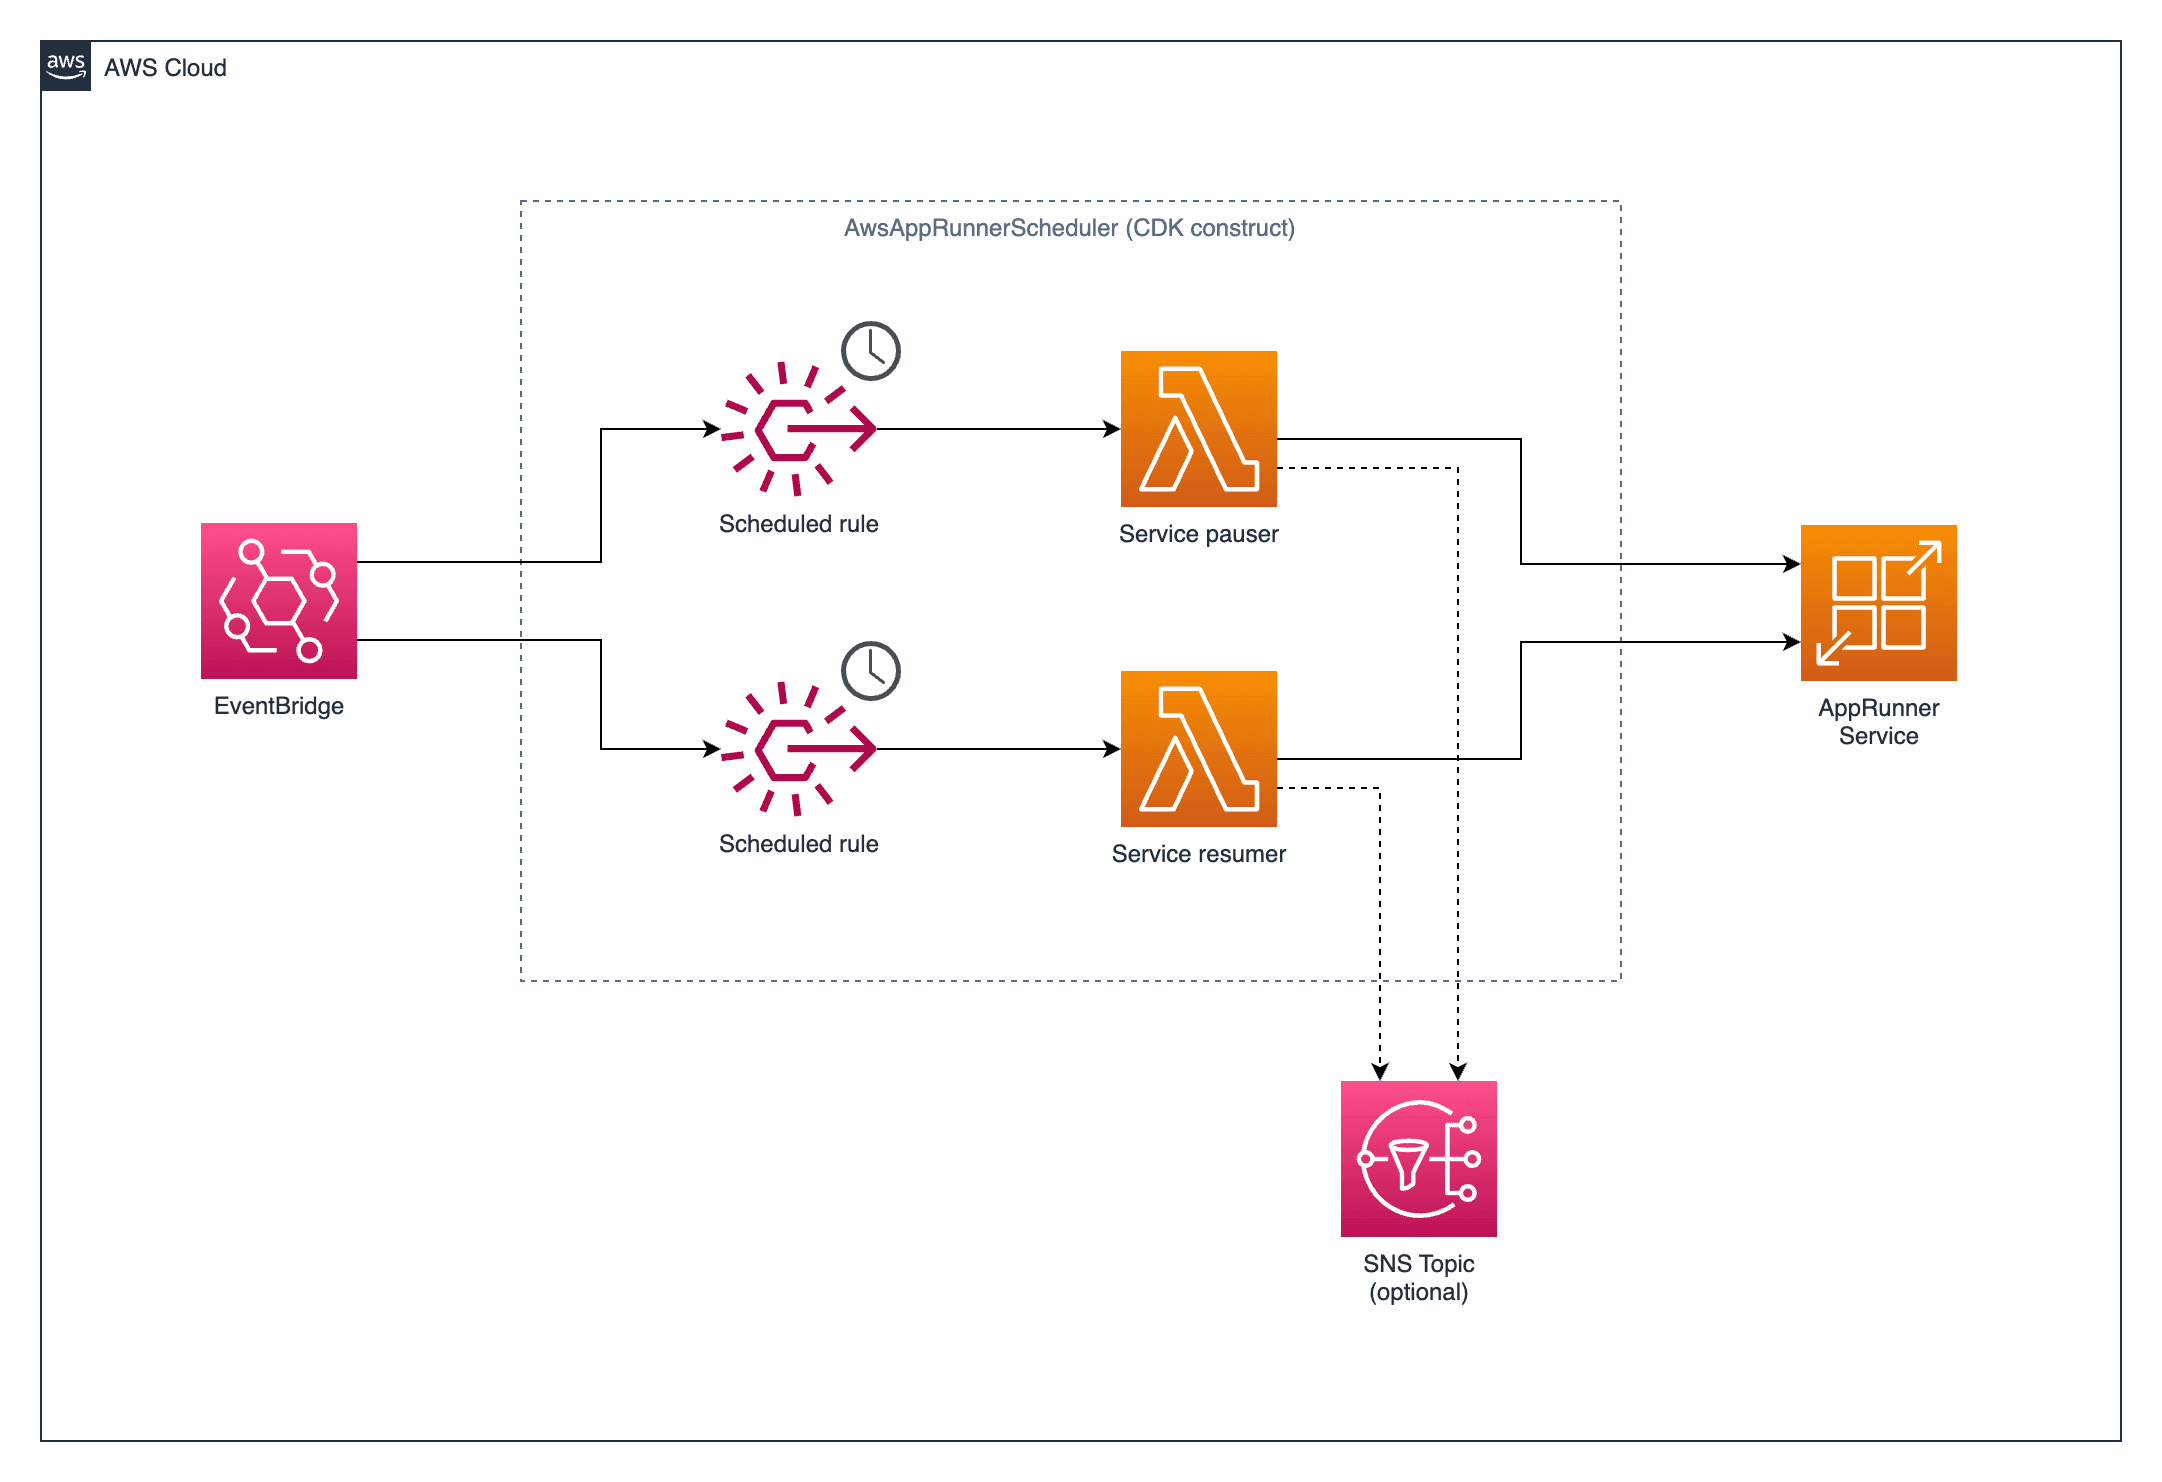 Architecture diagram showing AWS AppRunner scheduling solution